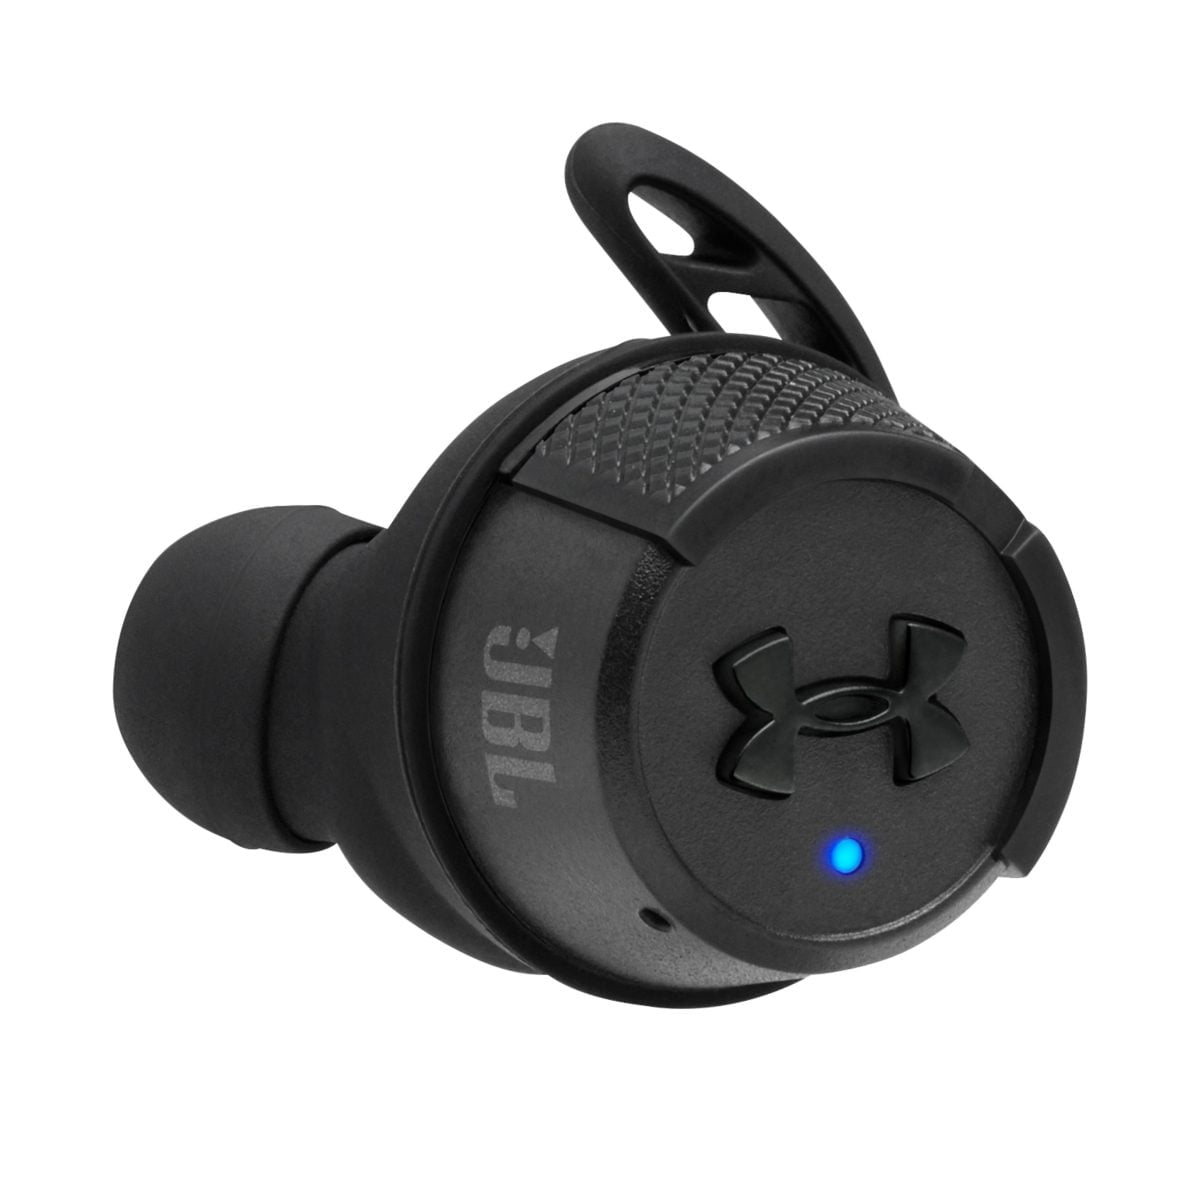 6427212 Sd Scaled Jbl &Lt;H1 Class=&Quot;Heading-5 V-Fw-Regular&Quot;&Gt;Jbl Under Armour True Wireless Sport In-Ear Headphones - Black&Lt;/H1&Gt; Https://Www.youtube.com/Watch?V=1Qoid77Its0 Ua True Wireless Flash X Offers A Cable-Free Truly Wireless Experience To Push Athletes To Perform Their Best. Ua Waterproof Technology Allows Training In All Conditions, And Sport Flex Fit Ear Tips Provide A Comfortable Yet Snug Fit That Provides Passive Noise Cancellation For Superior Focus. Jbl Charged Sound Was Tuned To Maximize Motivation, And Bionic Hearing Features Talkthru Technology To Quickly Interact With Your Workout Partner, And Ambient Aware Technology To Hear Your Surroundings For Increased Safety. With Up To 50 Hours Of Battery Life And A Durable Aluminum Charging Case, These Headphones Help You Break The Limits. Jbl Flash X Jbl Under Armour True Wireless Flash X